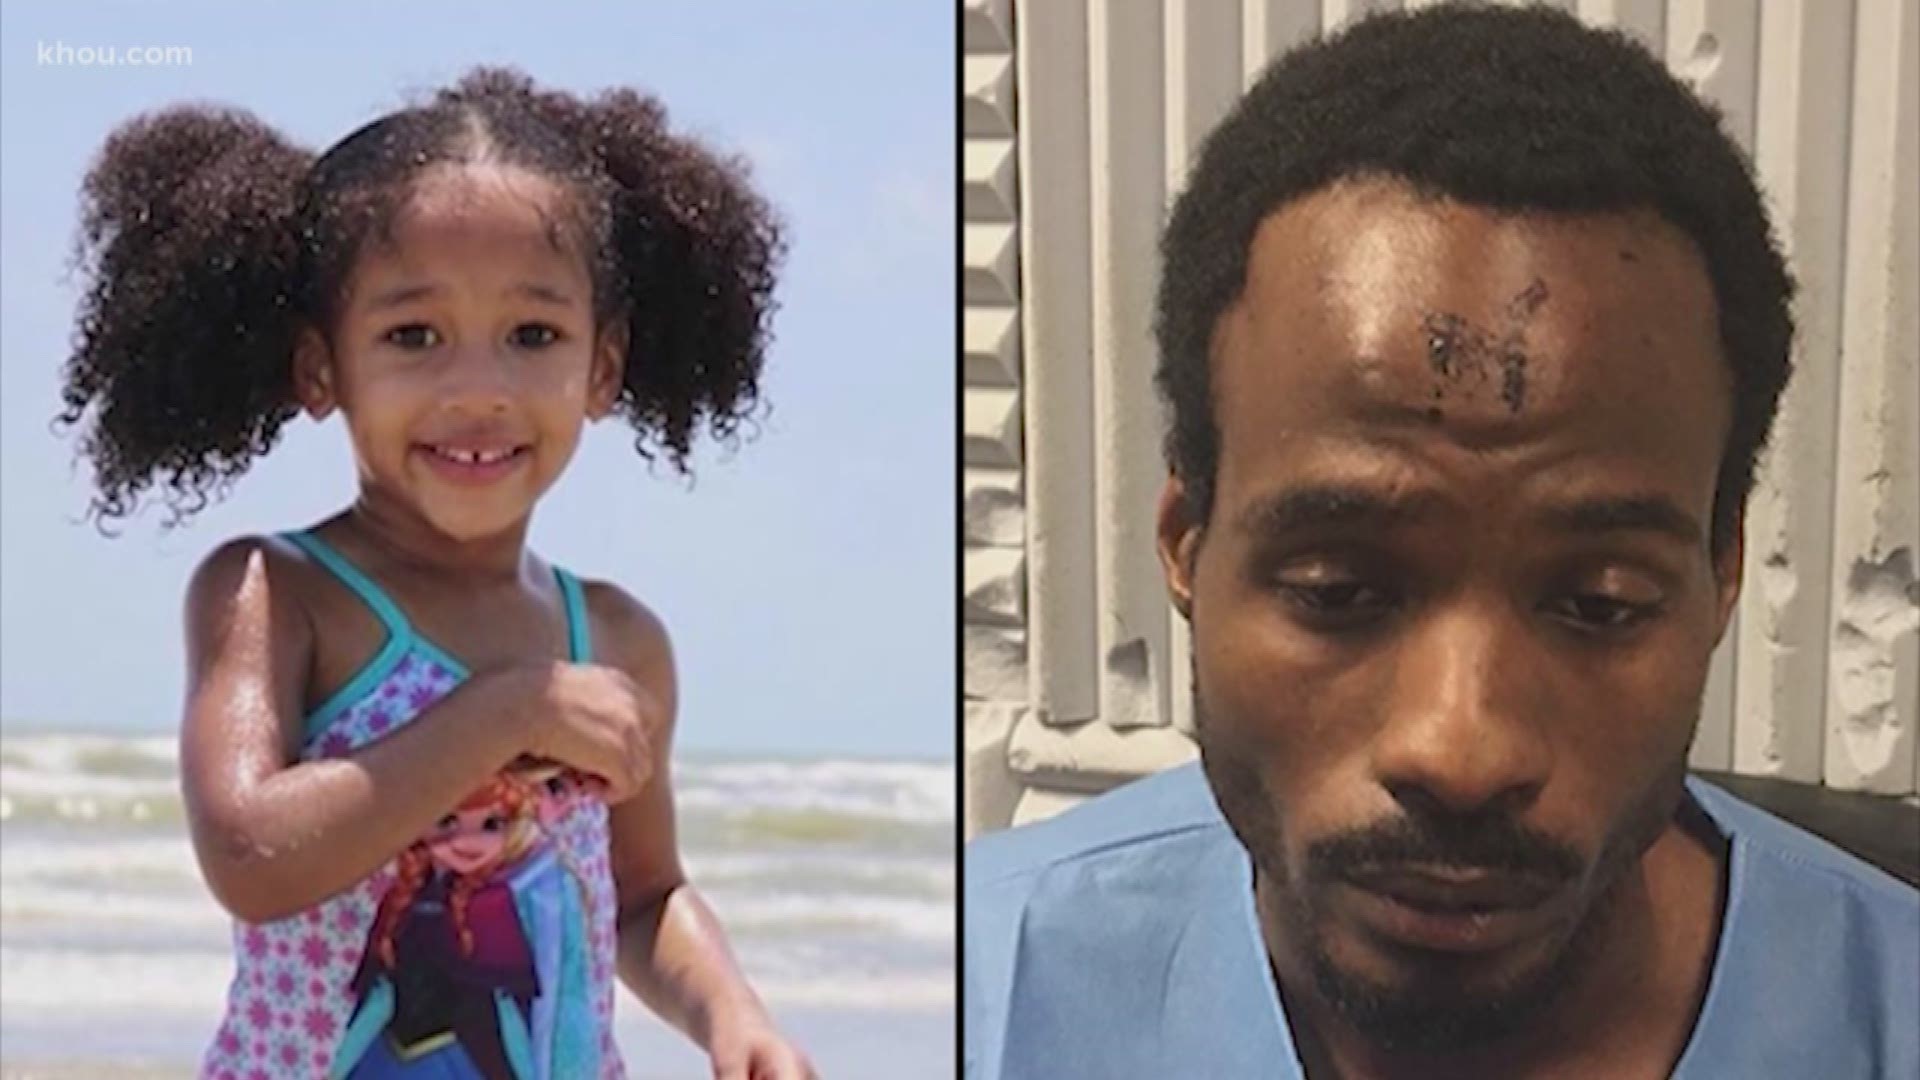 The attorney for Derion Vence, Maleah Davis’ stepfather, has filed a motion to withdraw his services as counsel.